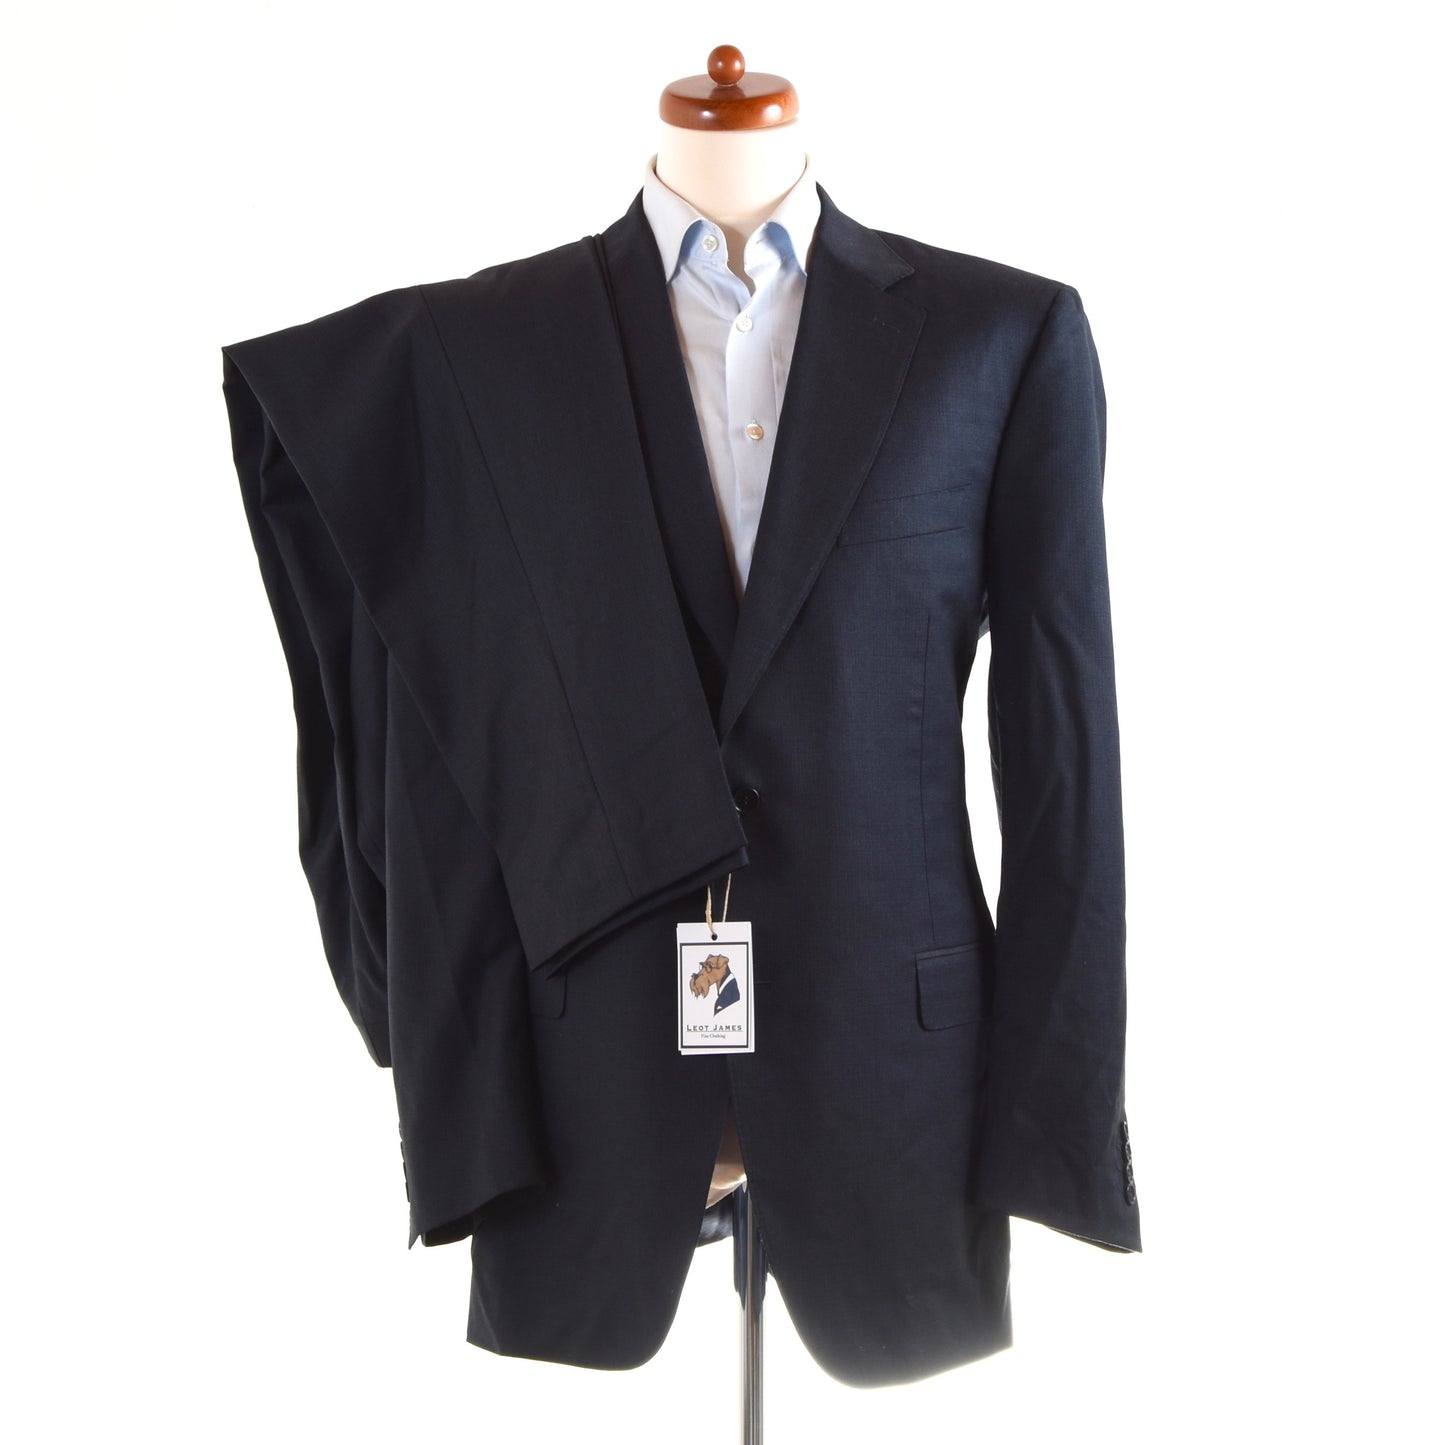 Canali 1934 Wool Suit Size 56  - Blue Nailhead